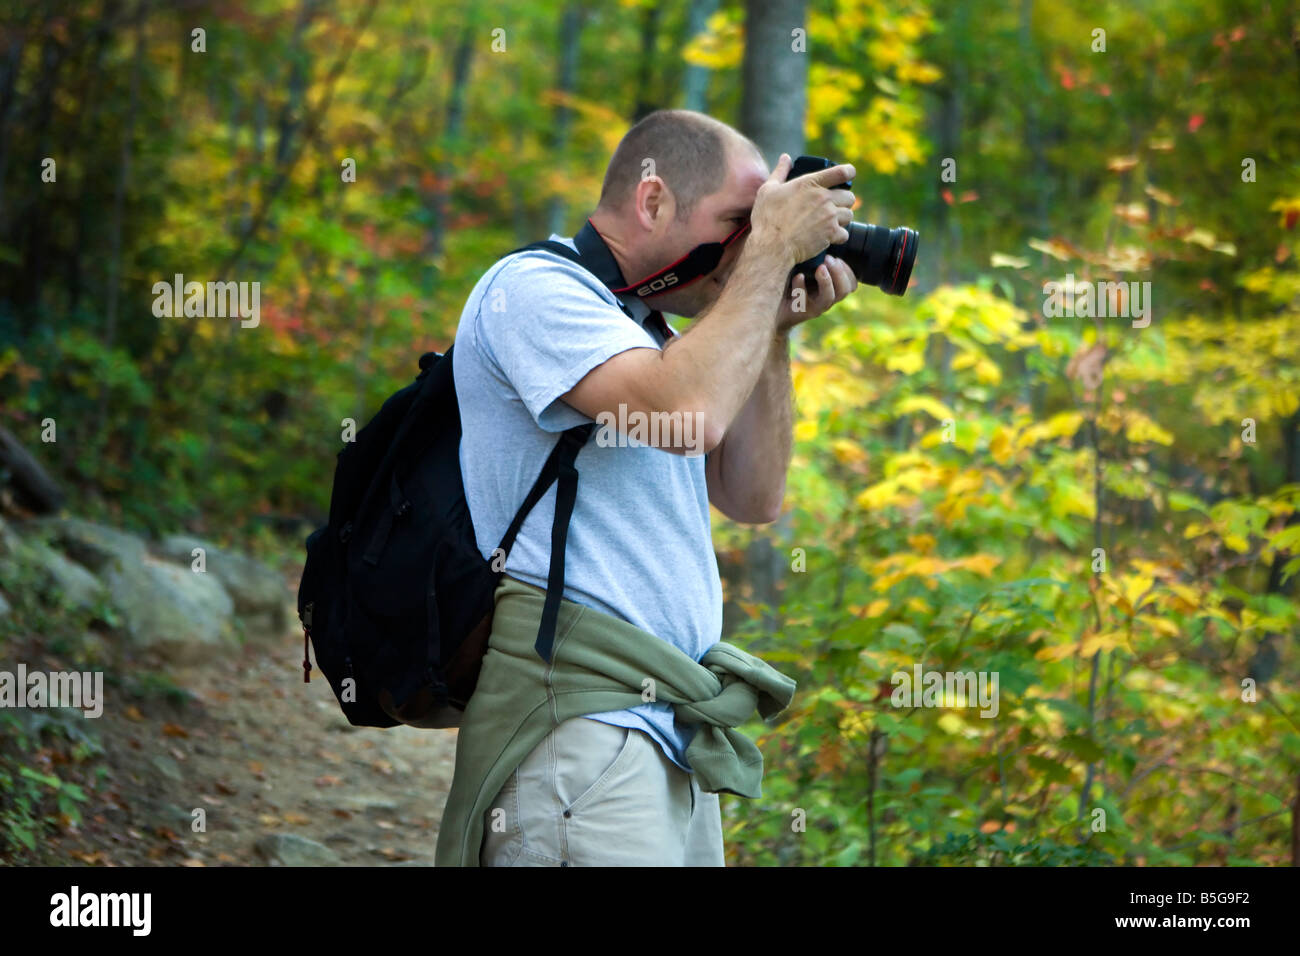 A male adult photographing nature along a trail, Old Rag Mountain, Shenandoah National Park, Virginia. Stock Photo